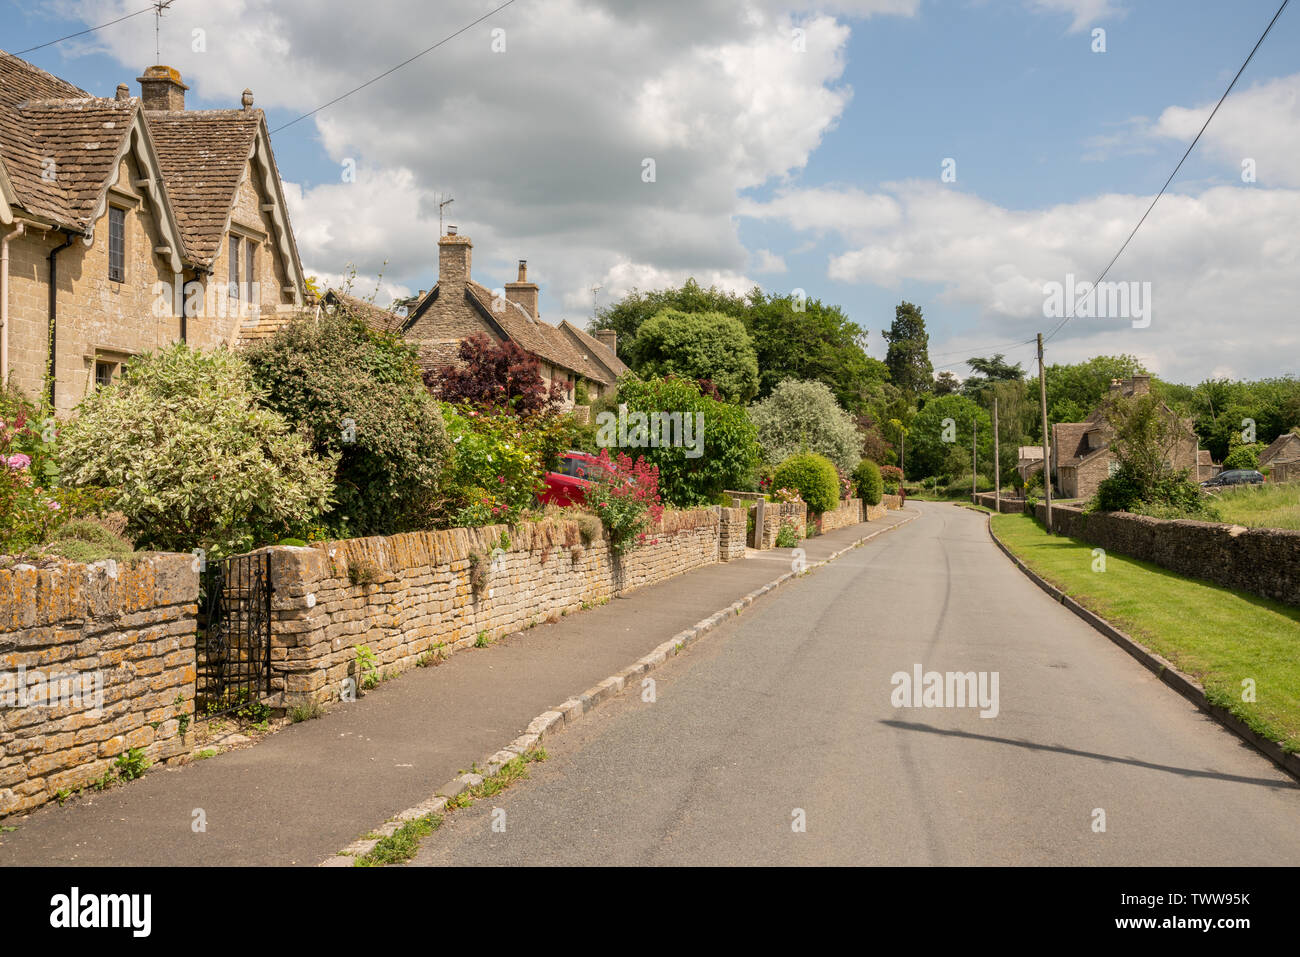 The picturesque Cotswold village of Westonbirt, Gloucestershire, United Kingdom Stock Photo